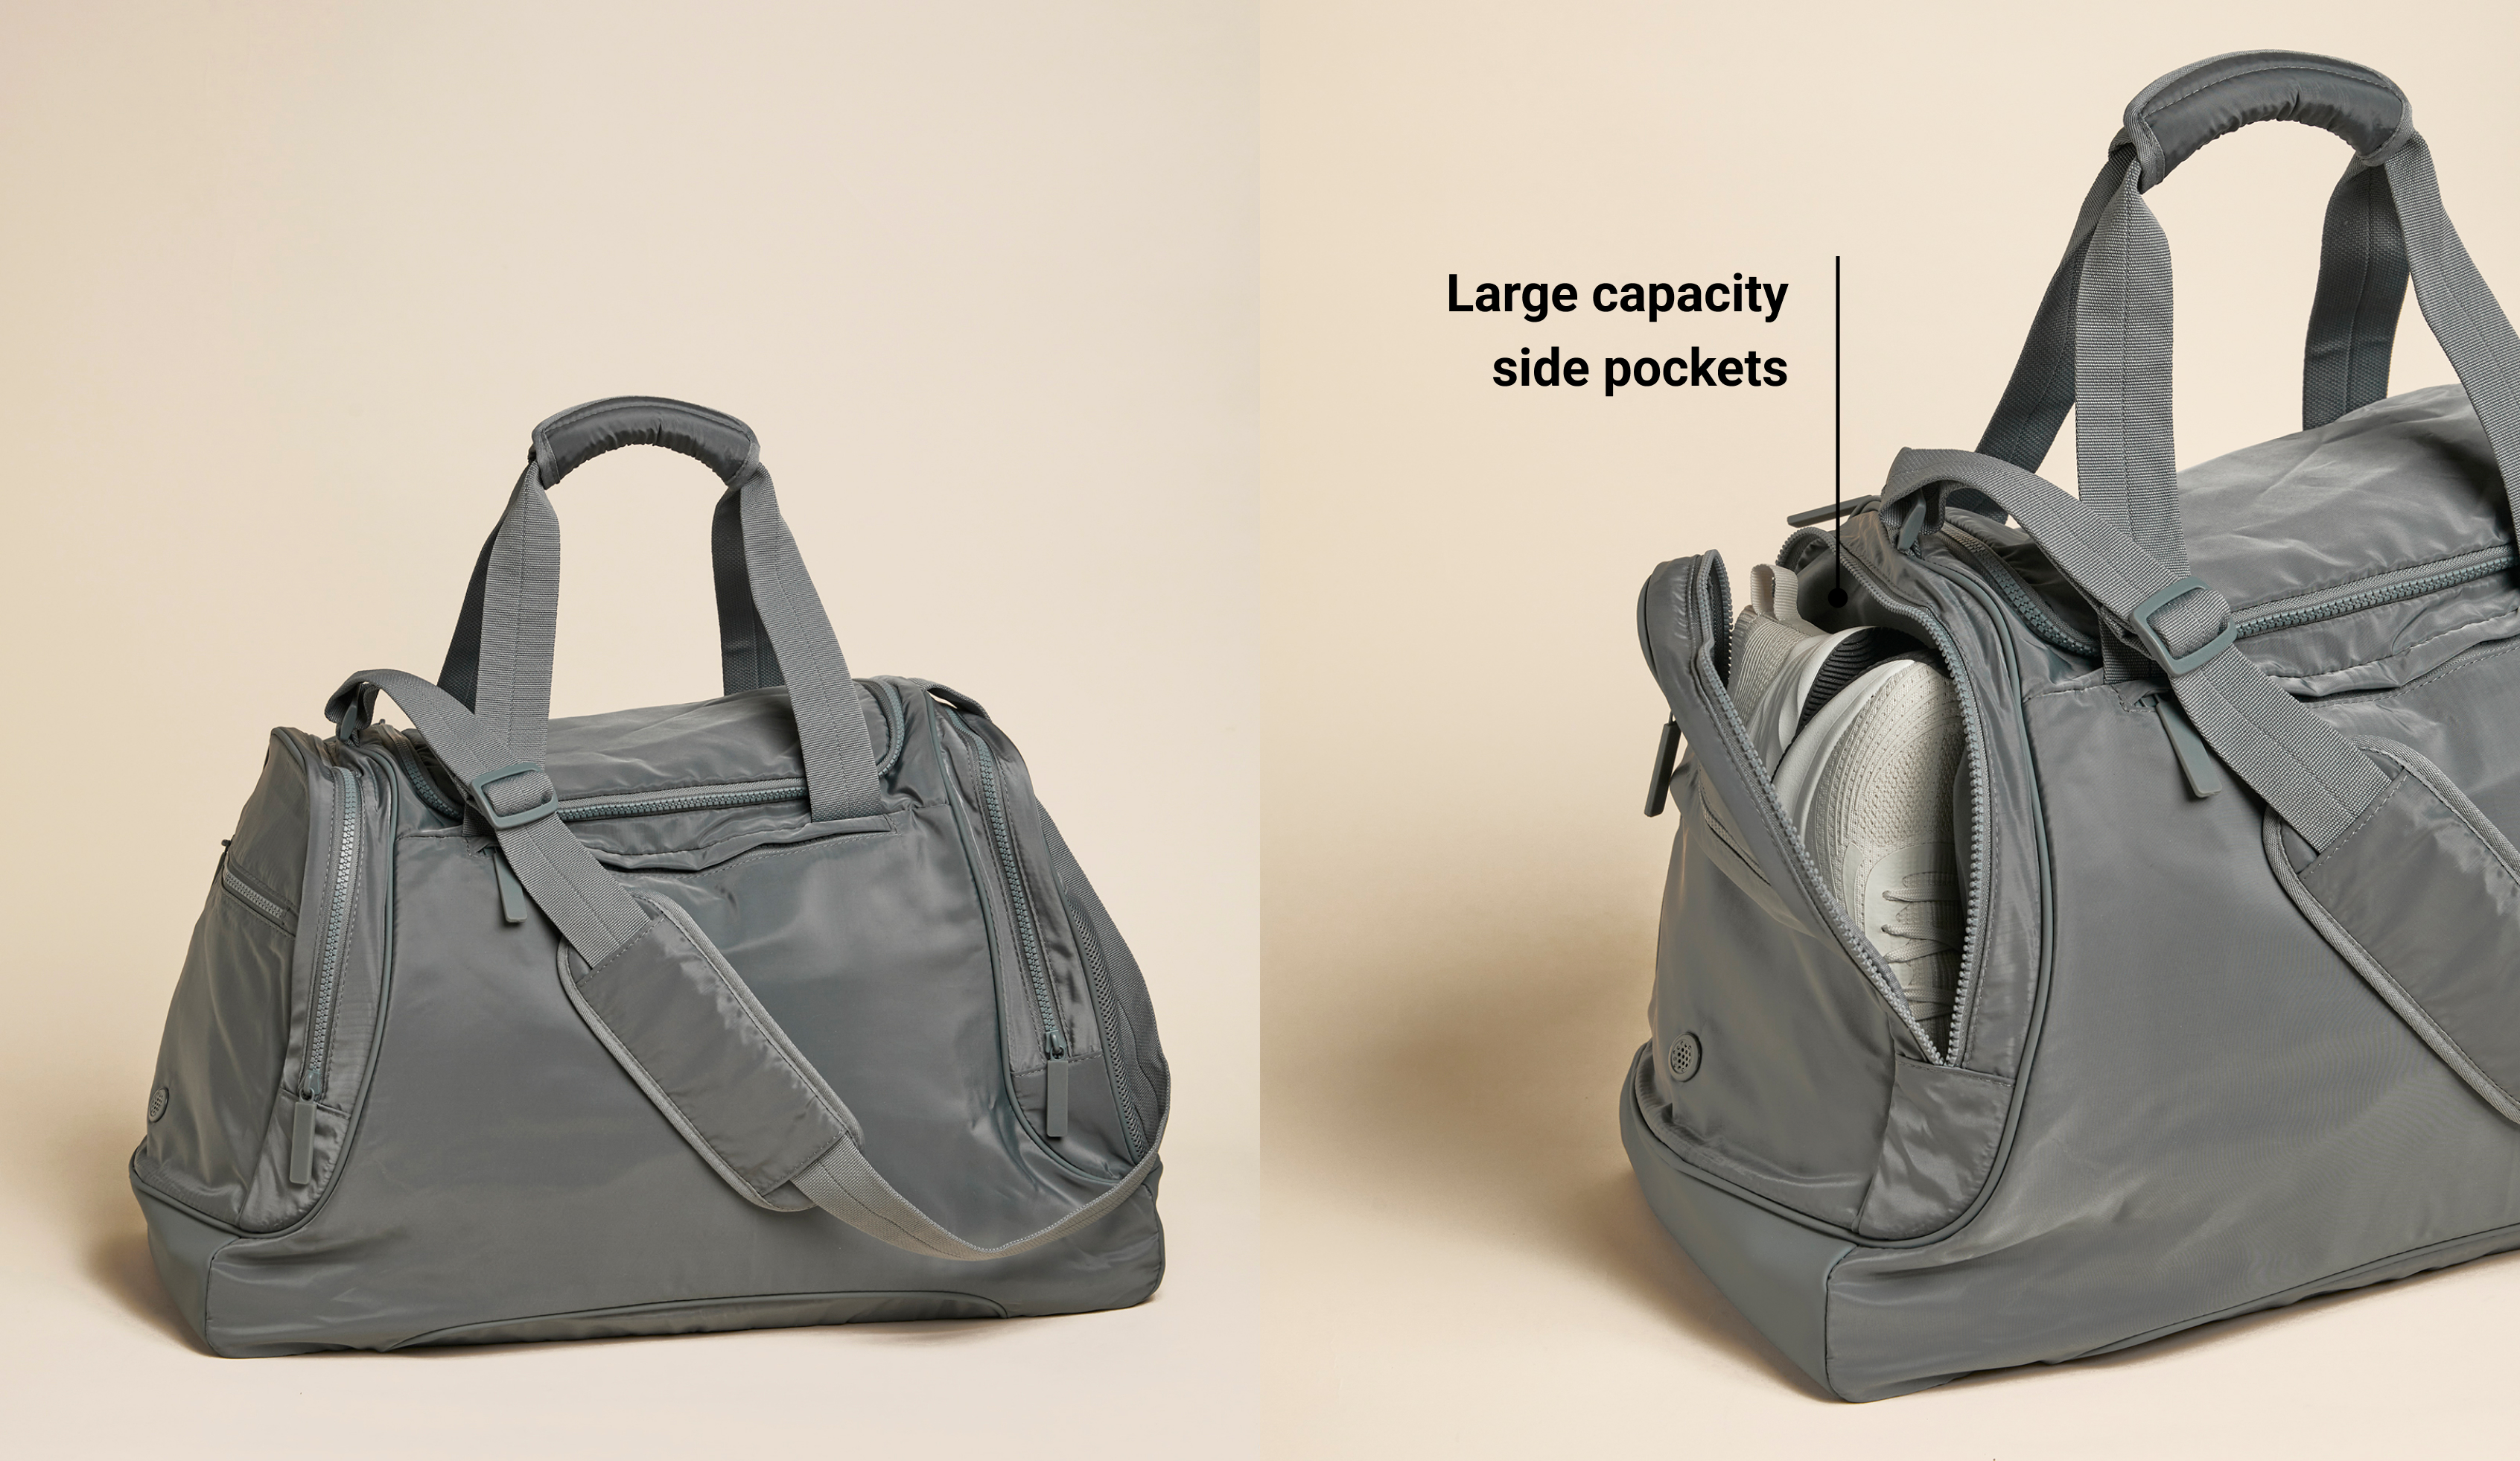 Technical bag with side pockets